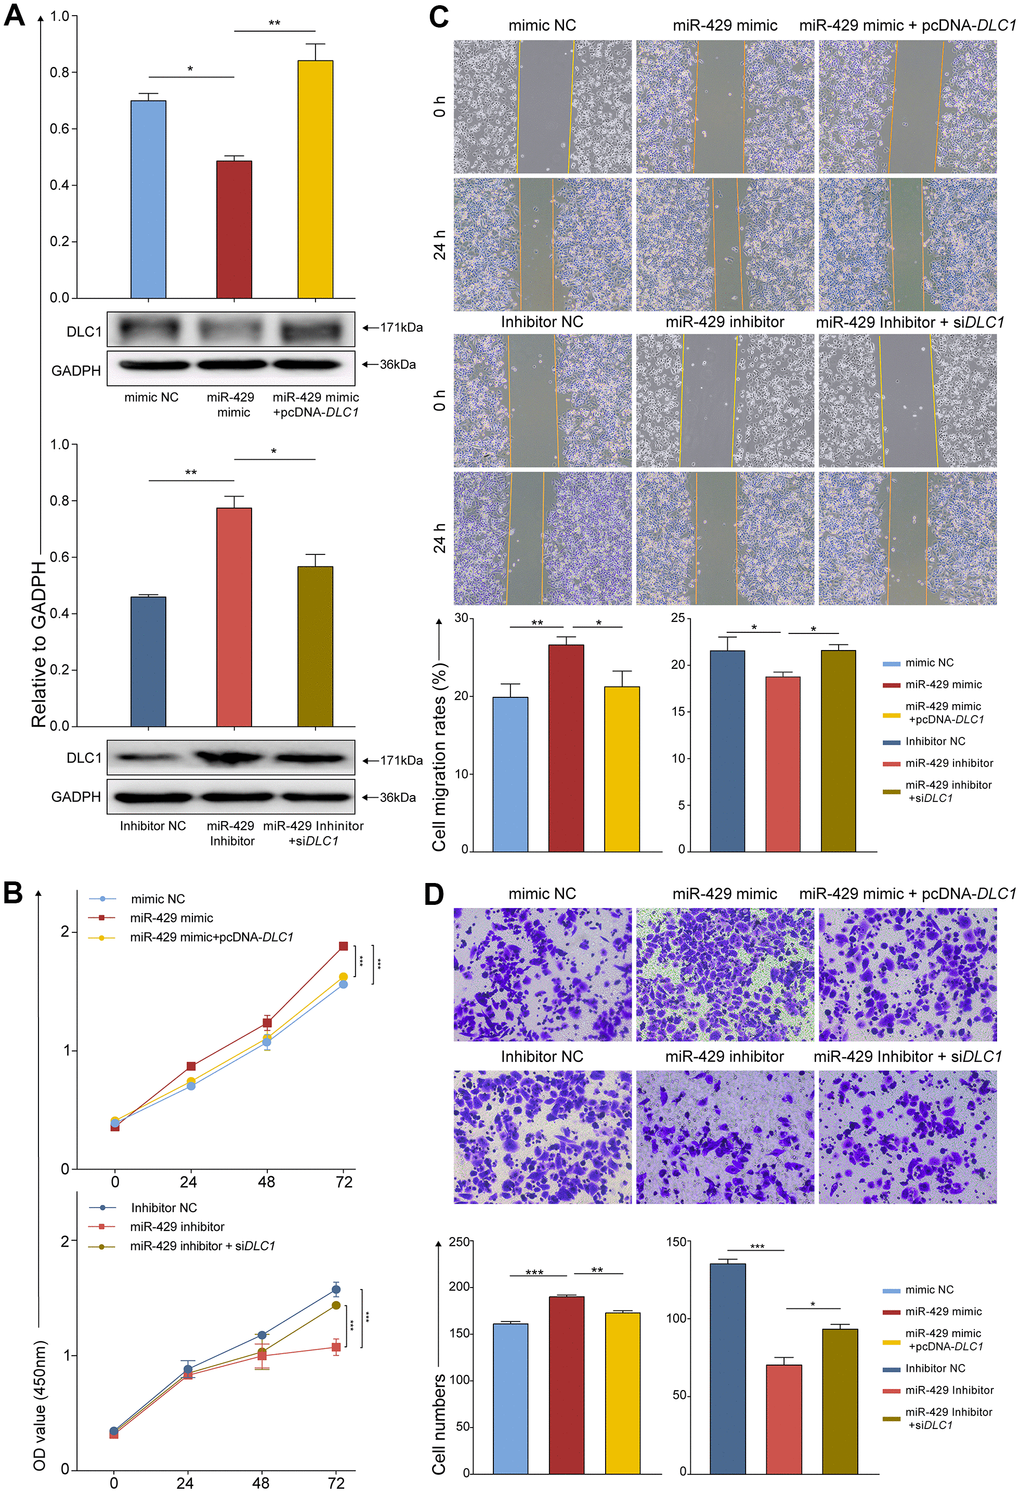 miR-429 increases TNBC cell proliferation, migration, and invasion through degradation of DLC1. (A) Protein levels of DLC1 relative to GADPH in cell assessed by Western Blot after transfection with indicated vectors, i.e., siRNA, miRNA, or inhibitor; (B) The cell proliferation was assessed by CCK-8 after transfection (0h, 24h, 48h,72h); (C) Wound healing assays were used to detect migration of cells after transfection (magnification, × 100). (D) The cell invasion was determined by transwell after transfection (magnification, × 200). All figures were 50 μm of scale bar. (* p 